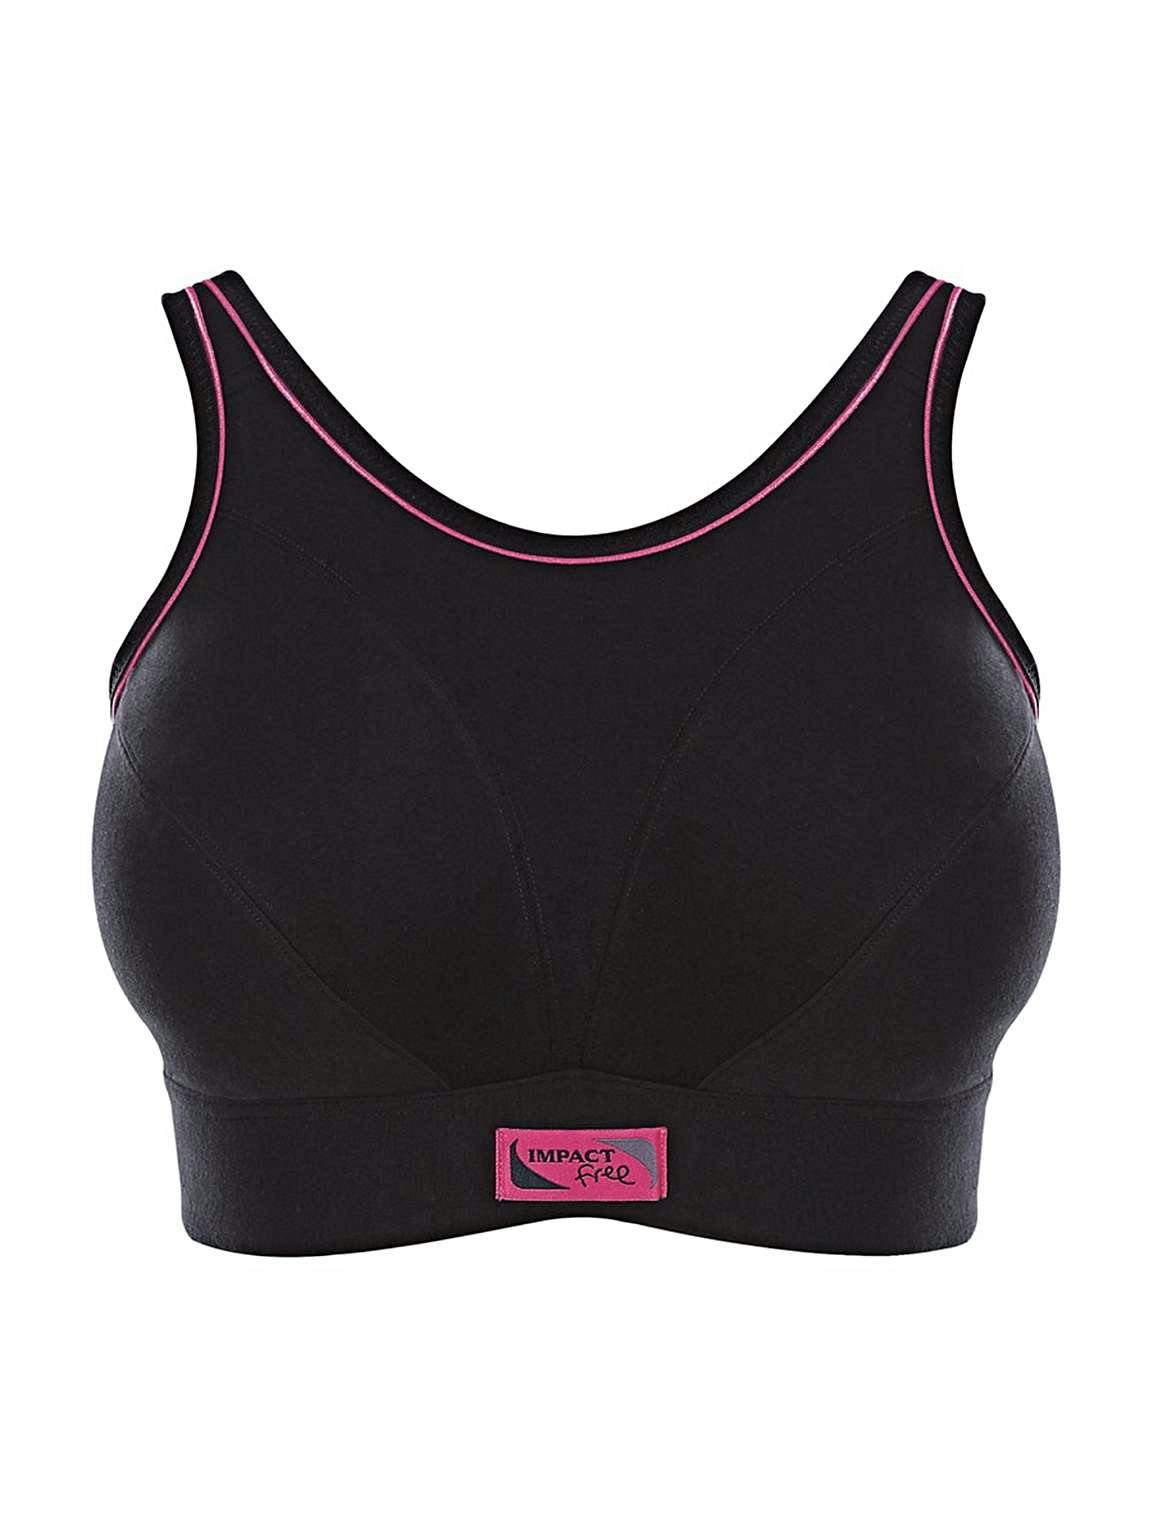 Sports Bras 11 Best Supportive Sports Bras For Bigger Boobs 